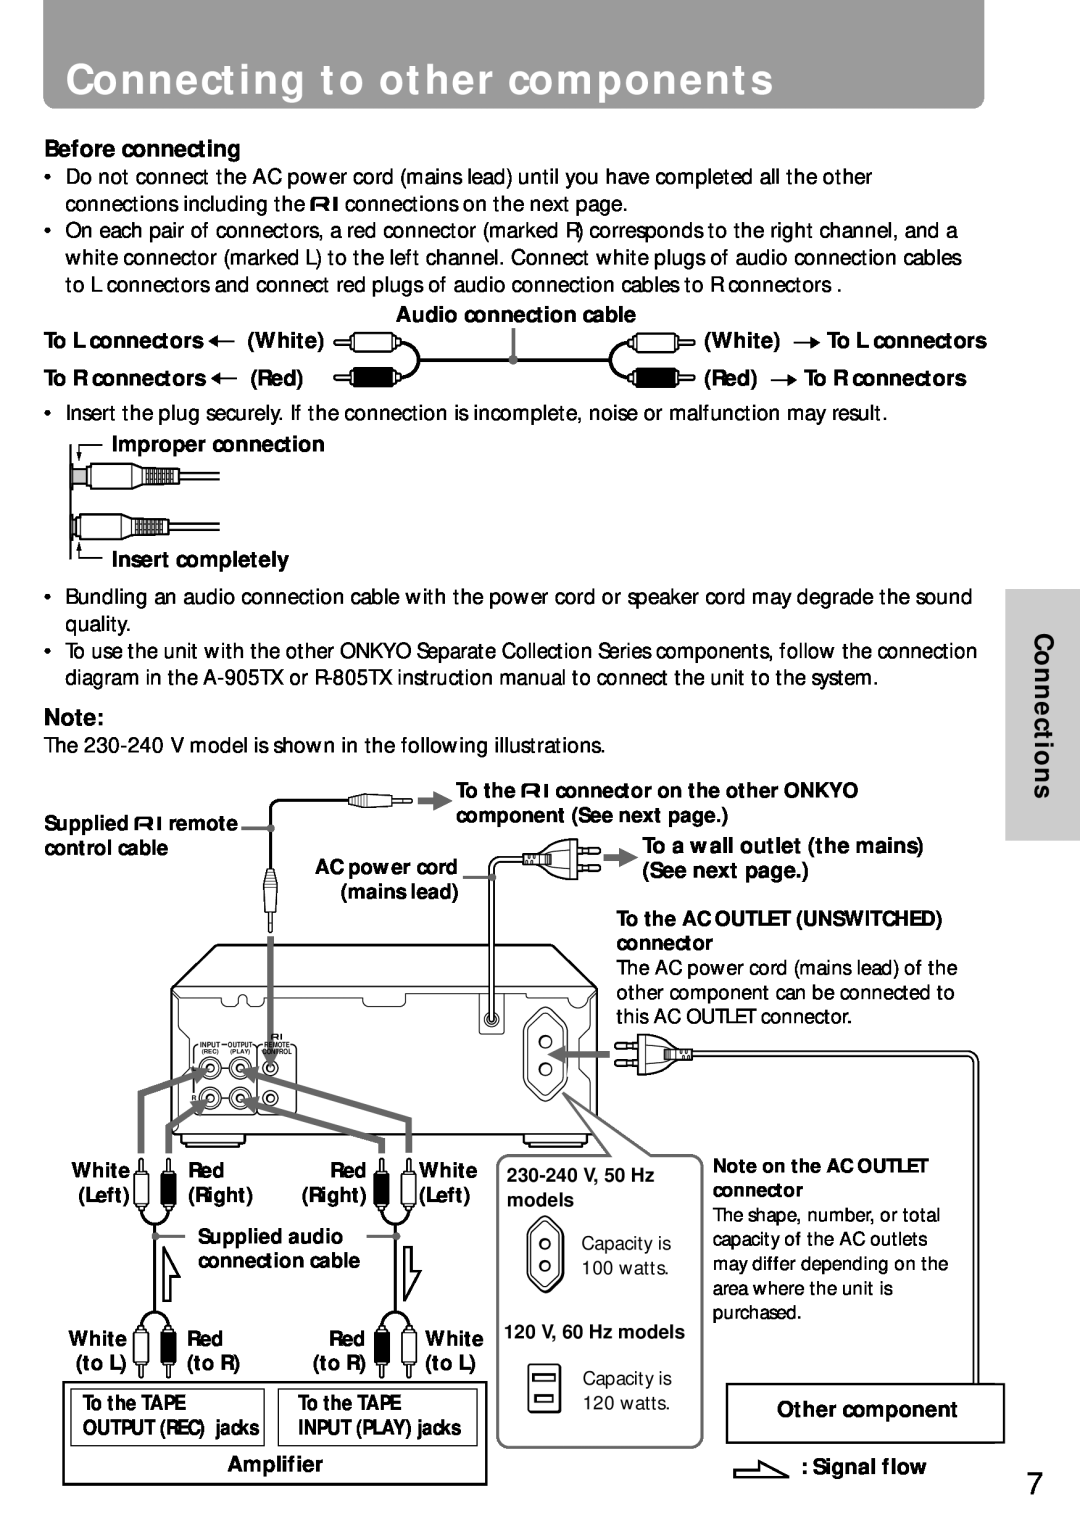 Onkyo K-505TX instruction manual Connecting to other components, Before connecting, Connections 